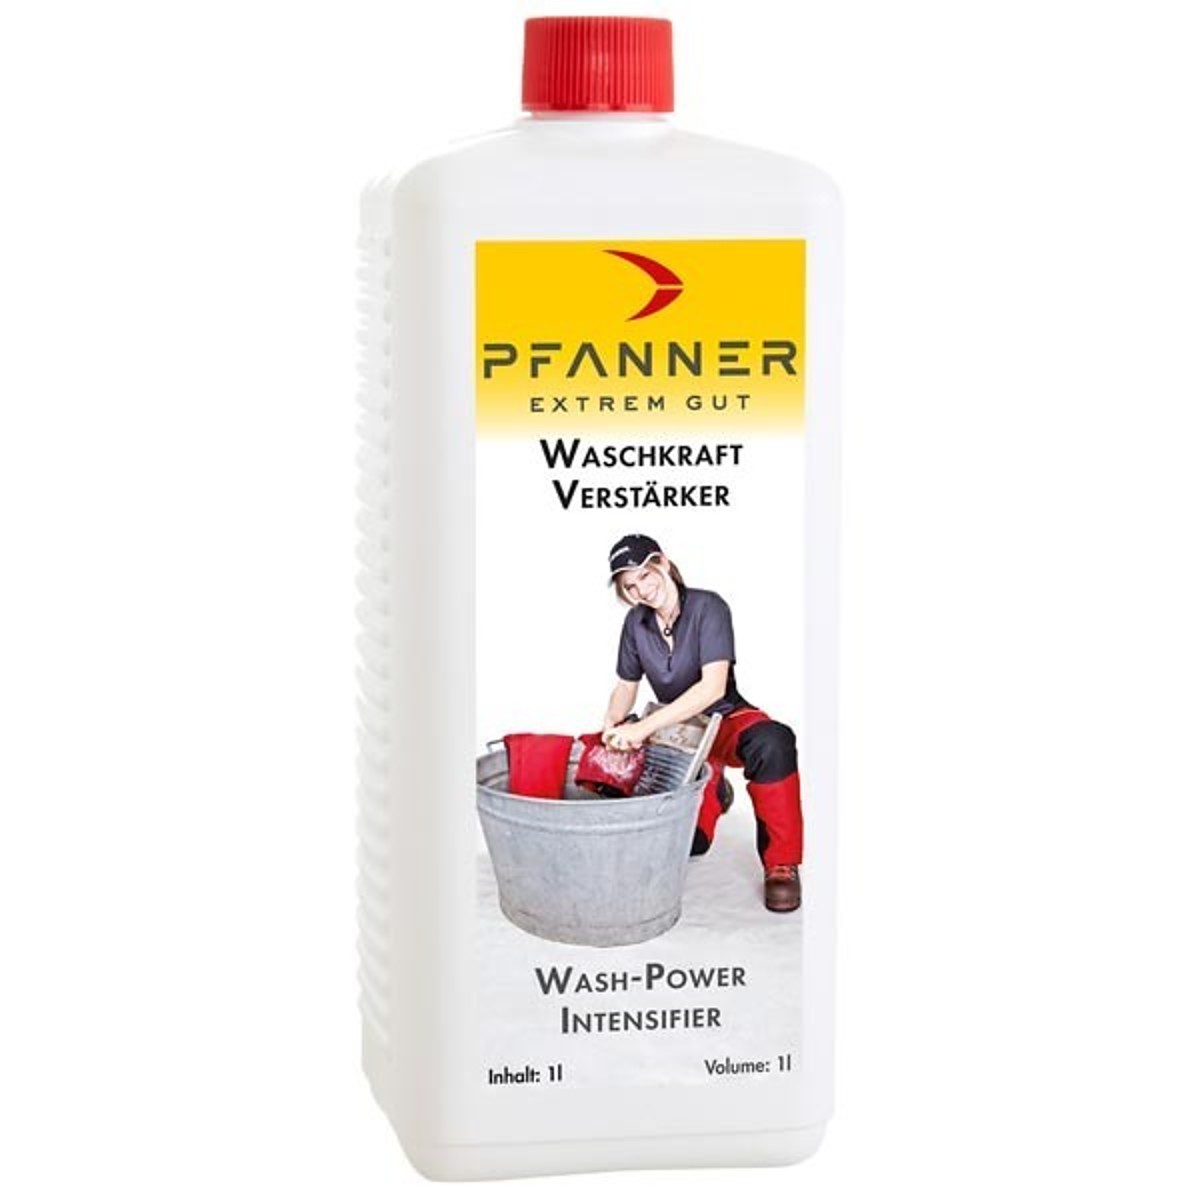 Pfanner washing power booster highly concentrated